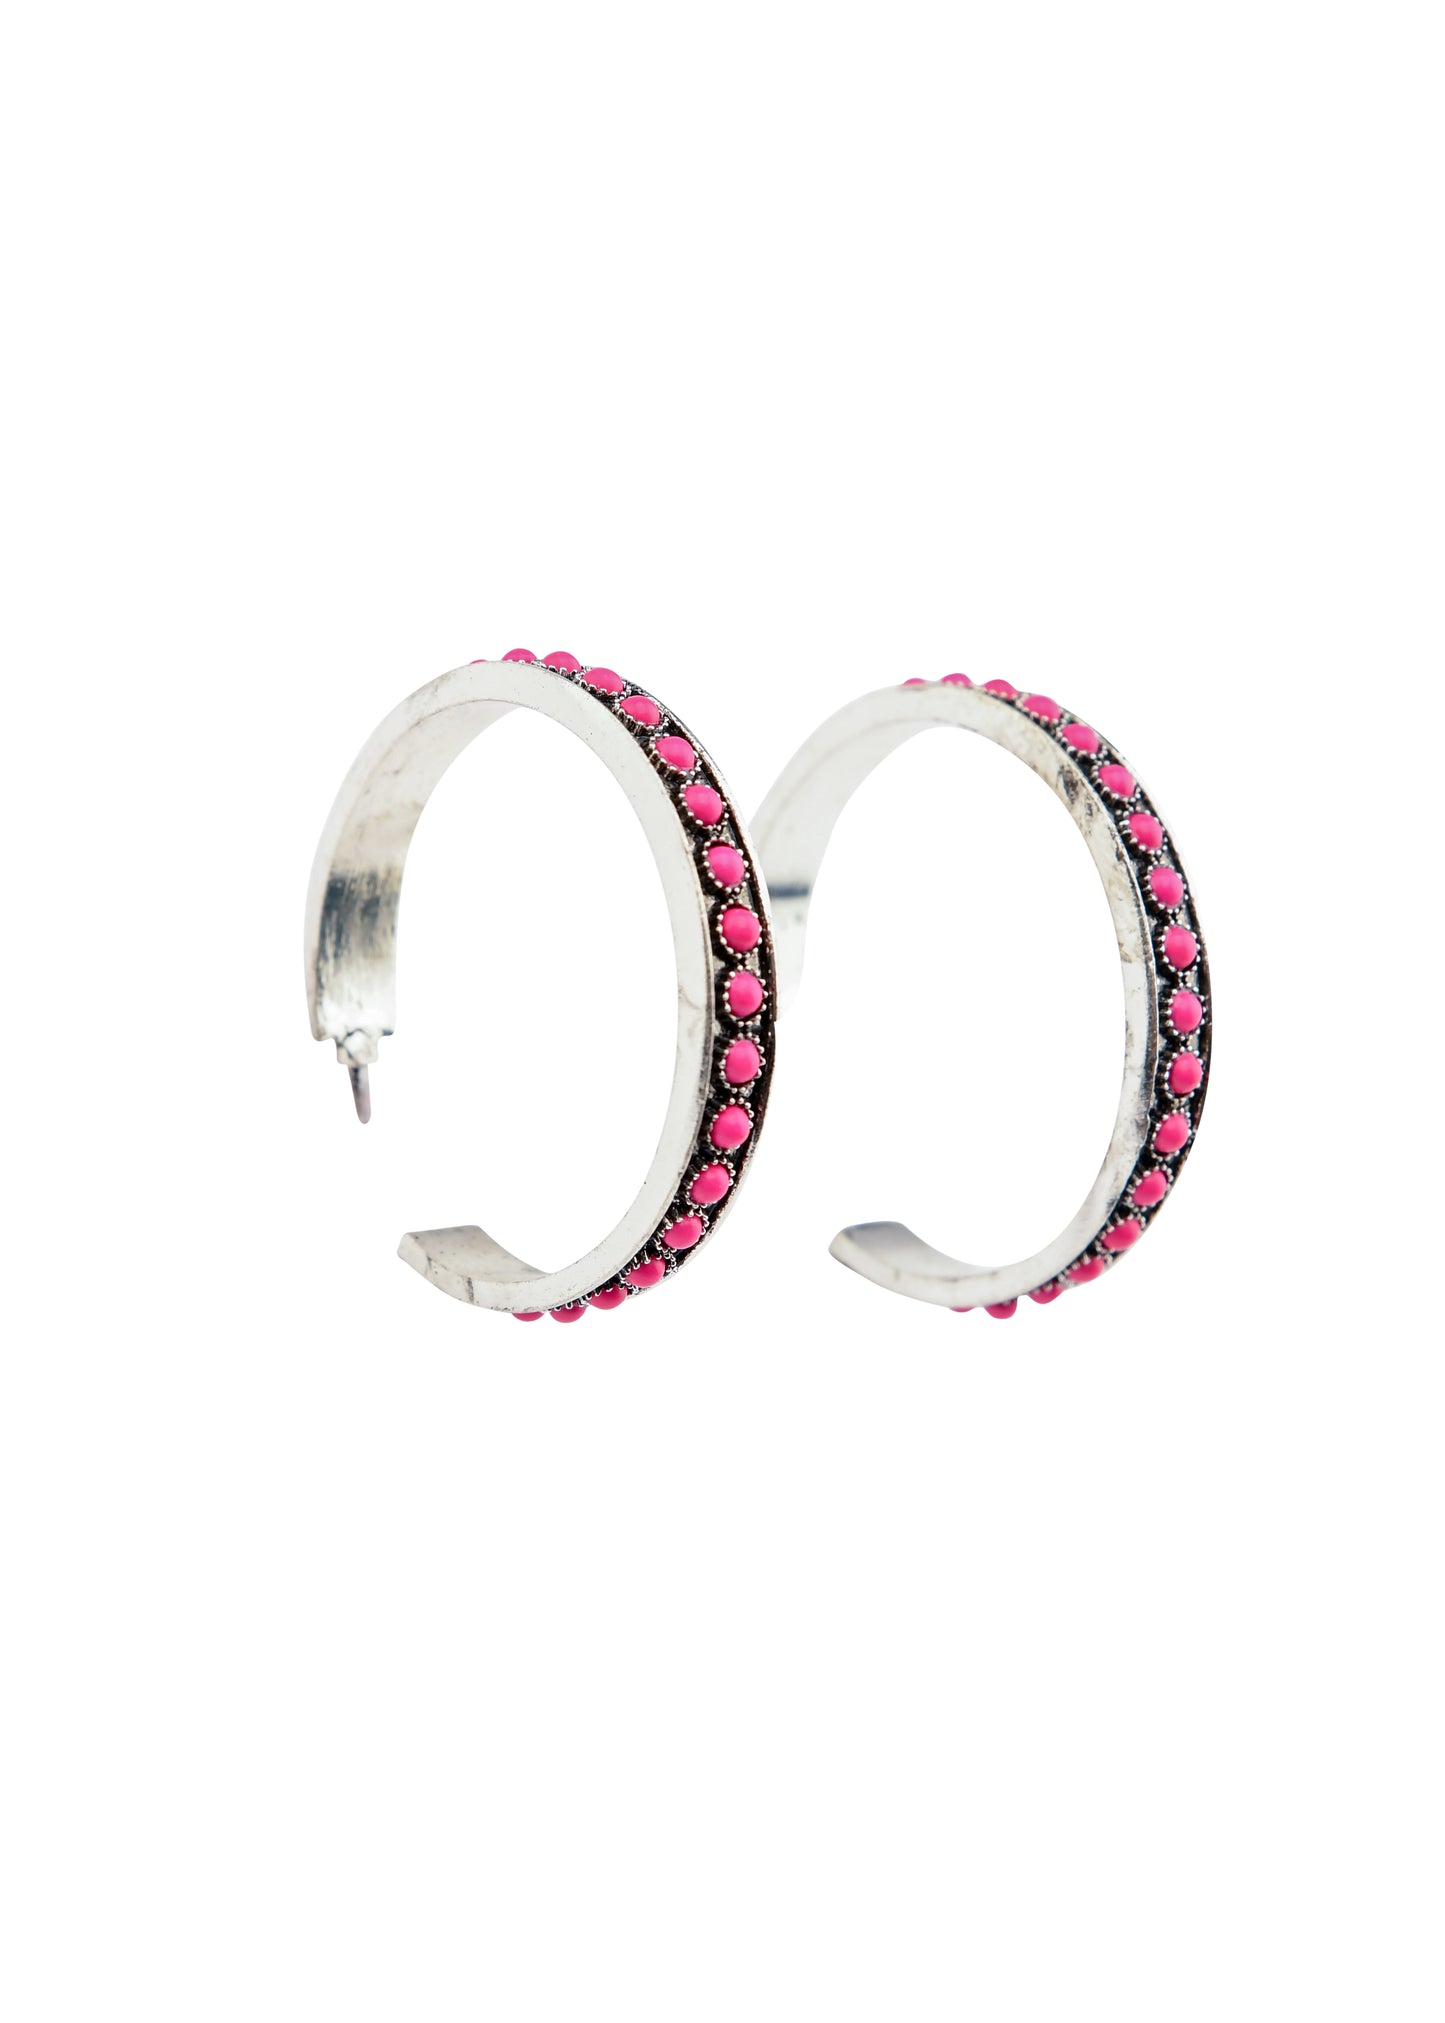 West and Co. Burnished Silver and Pink Hoop Earrings-Stud Earrings-West and Co.--The Twisted Chandelier